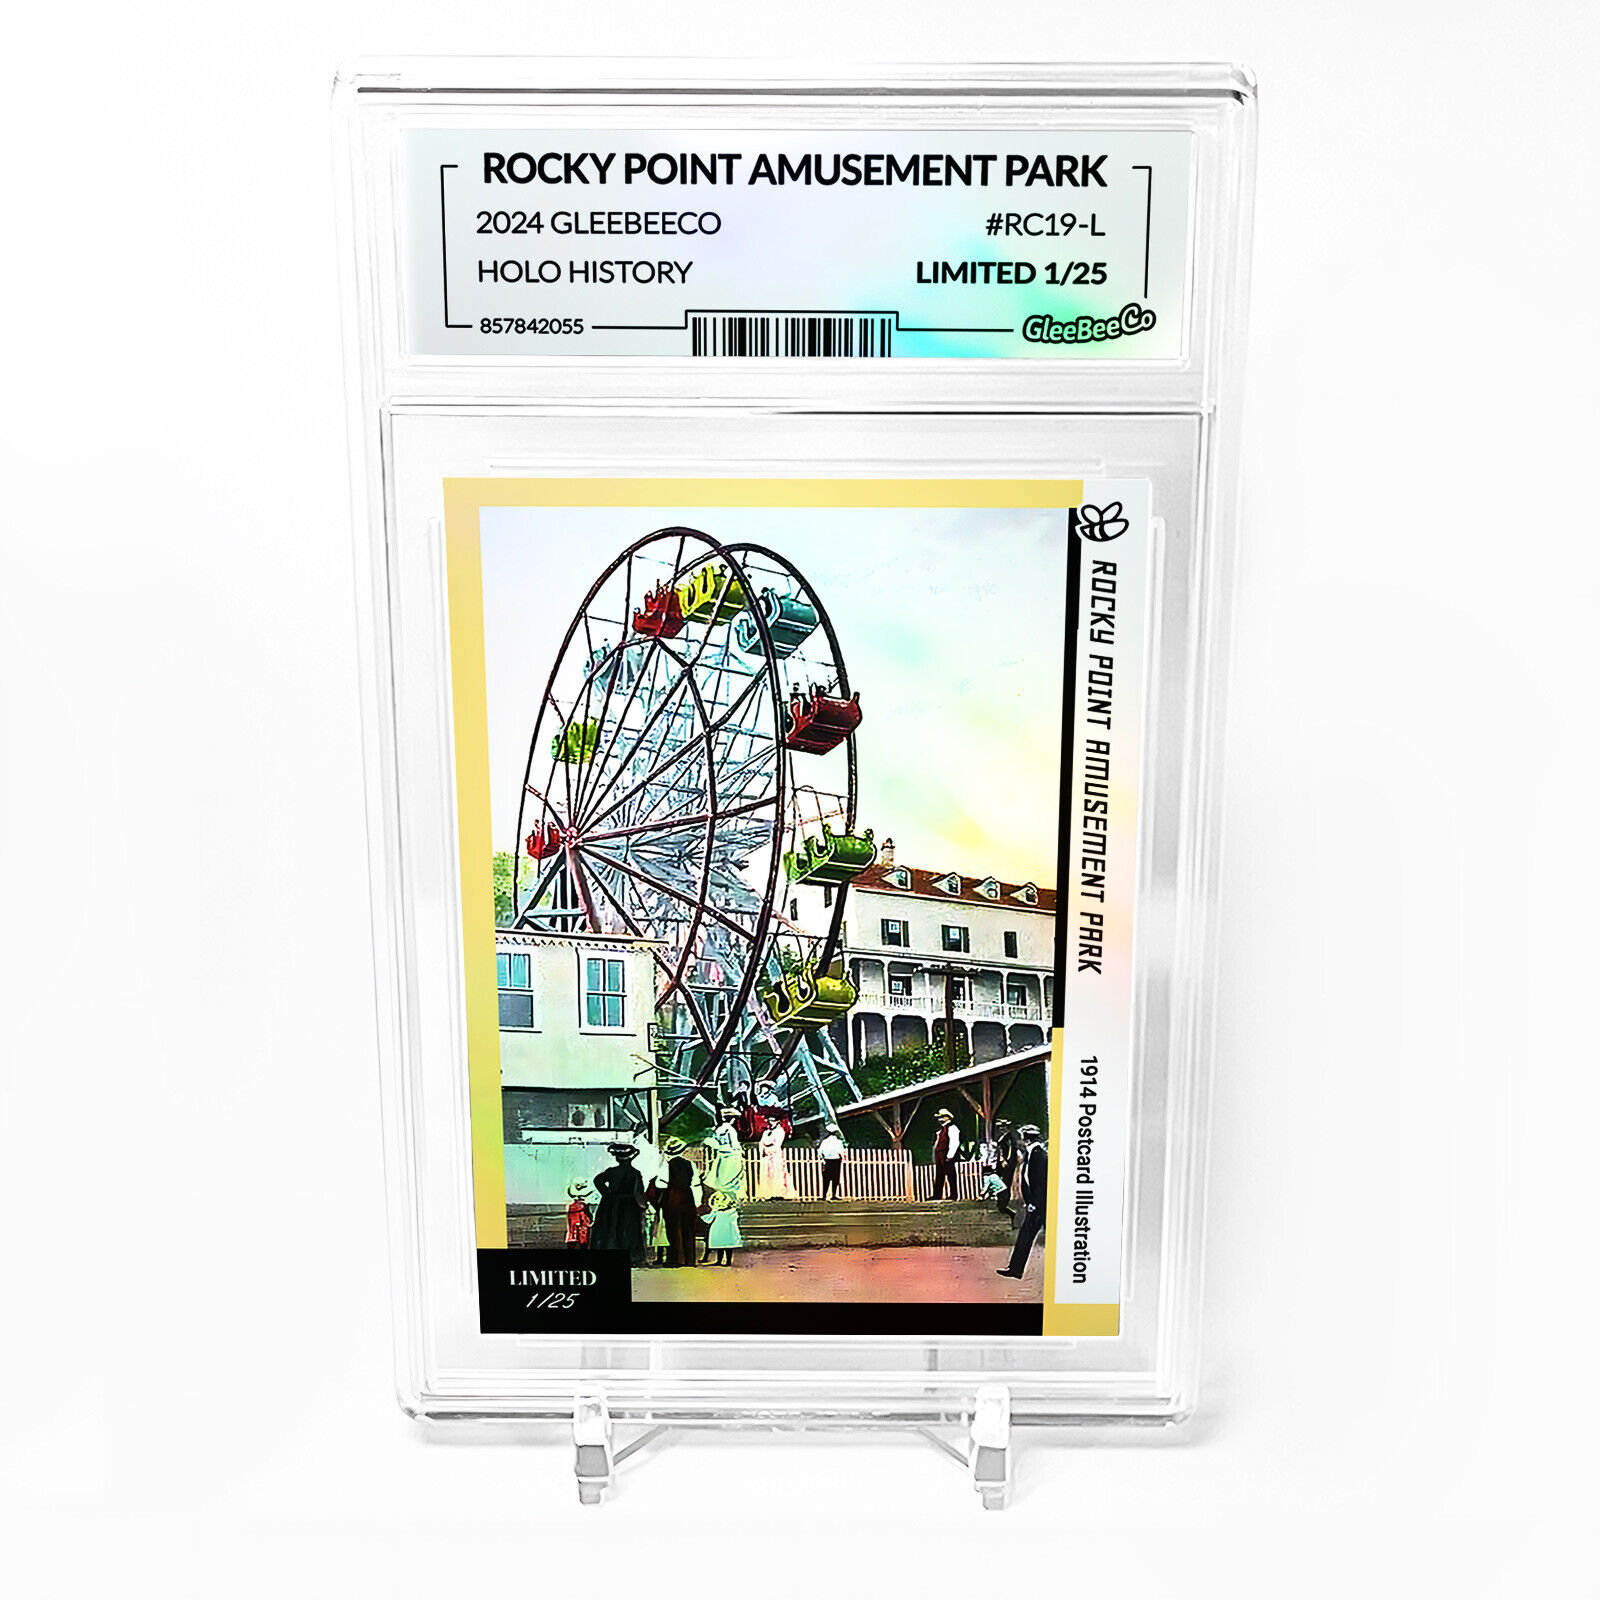 ROCKY POINT AMUSEMENT PARK Holographic Card GleeBeeCo #RC19-L LIMITED to /25